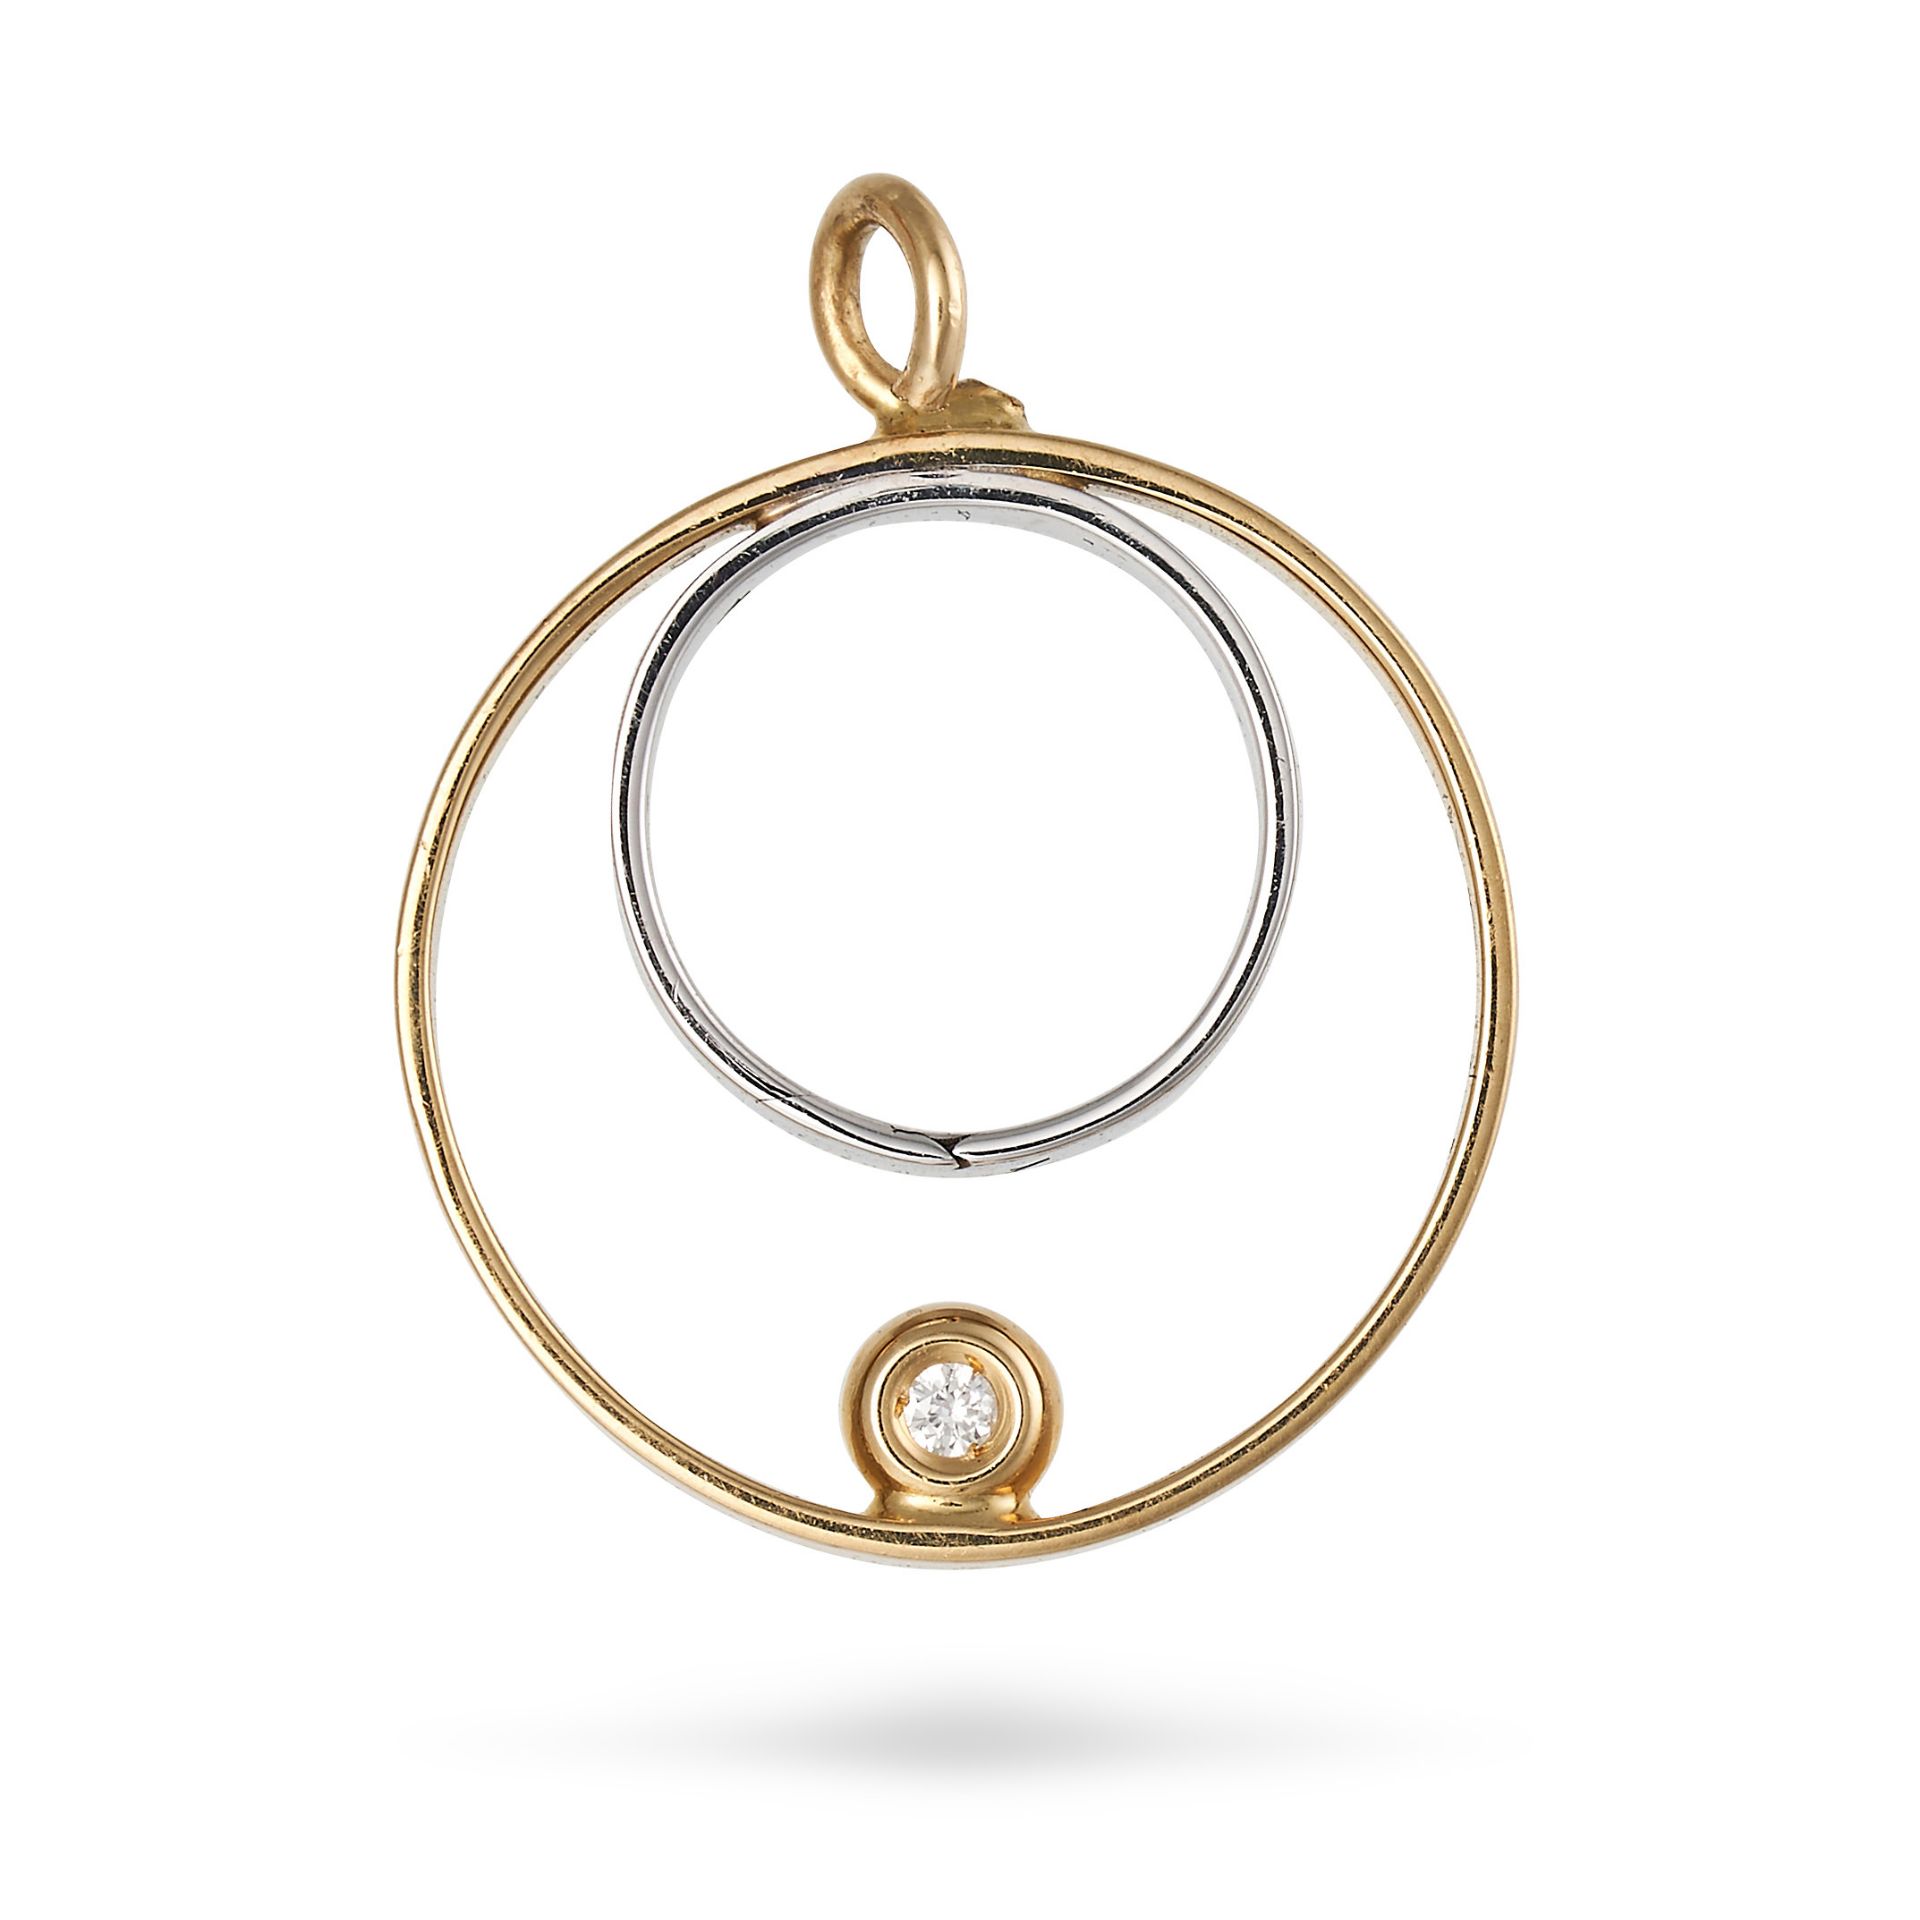 NO RESERVE - A DIAMOND PENDANT in yellow and white gold, comprising two concentric hoops set with...